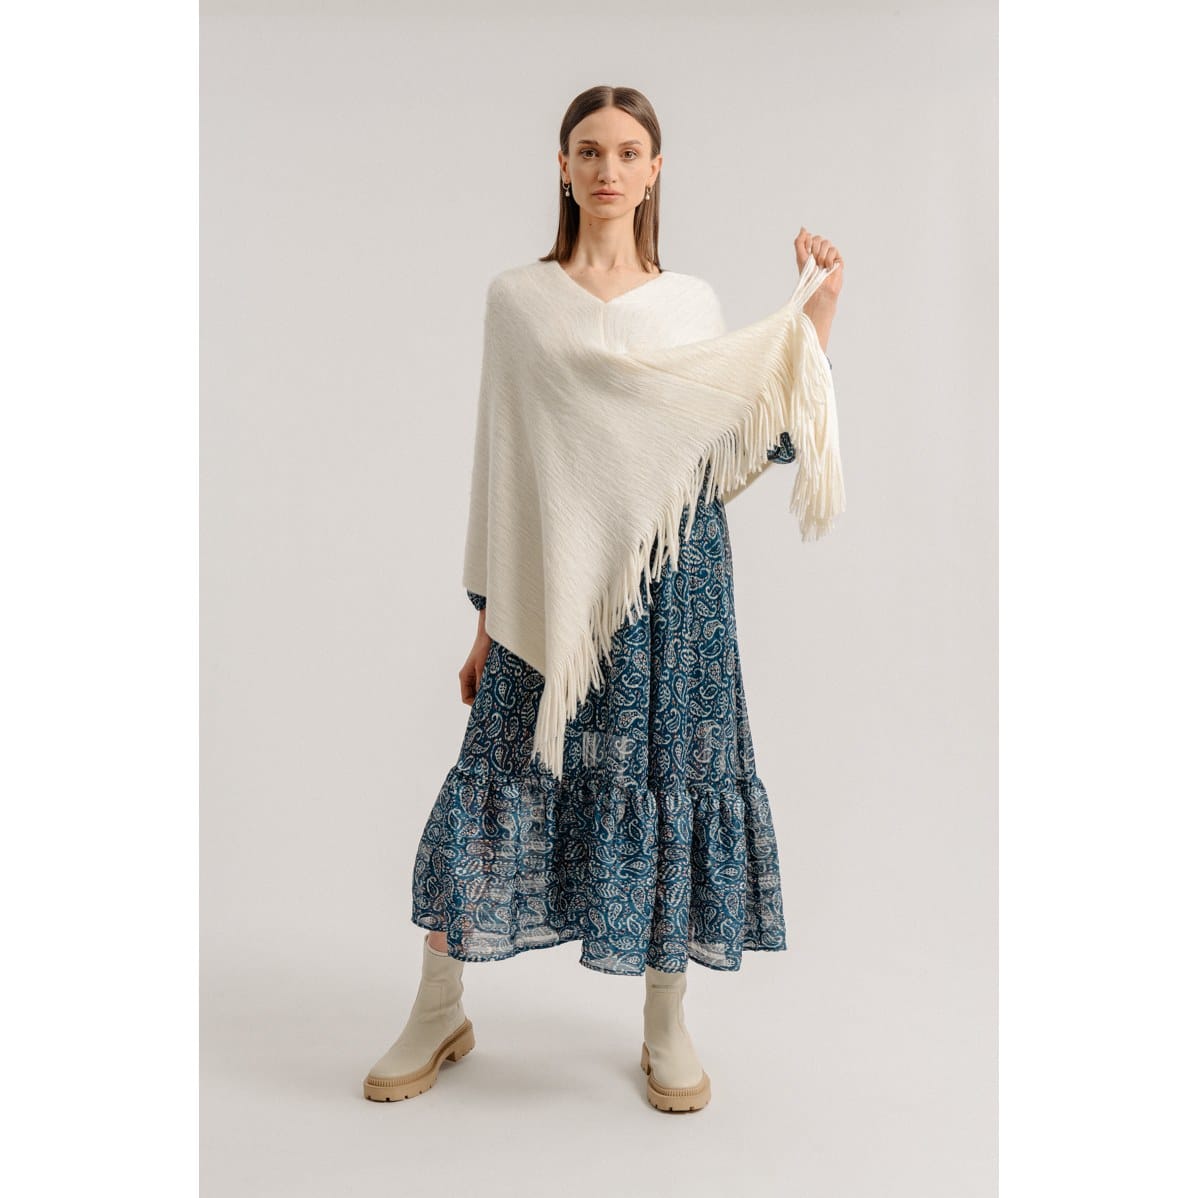 Molly Bracken – Ladies Knitted Poncho Bs – Offwhite (1)